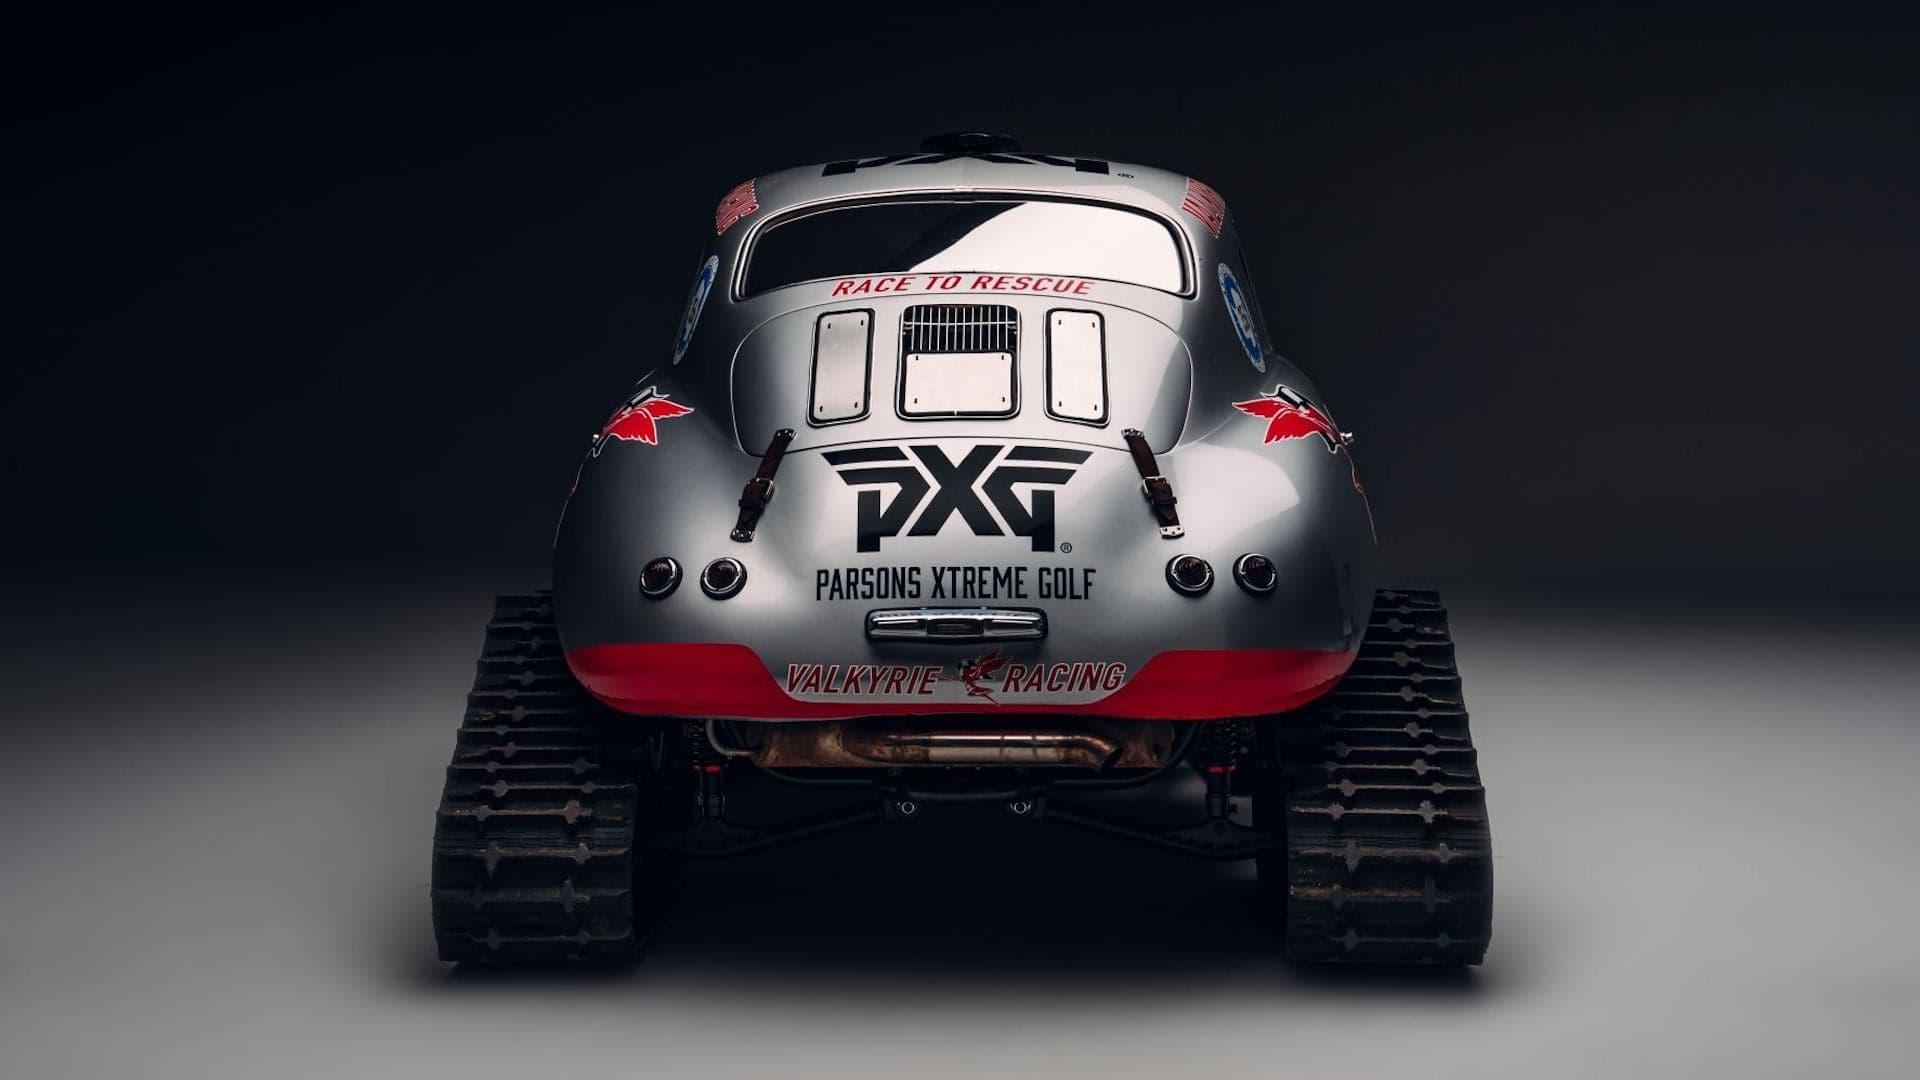 This Porsche 356 on Skis Could Set a Land Speed Record in Antarctica